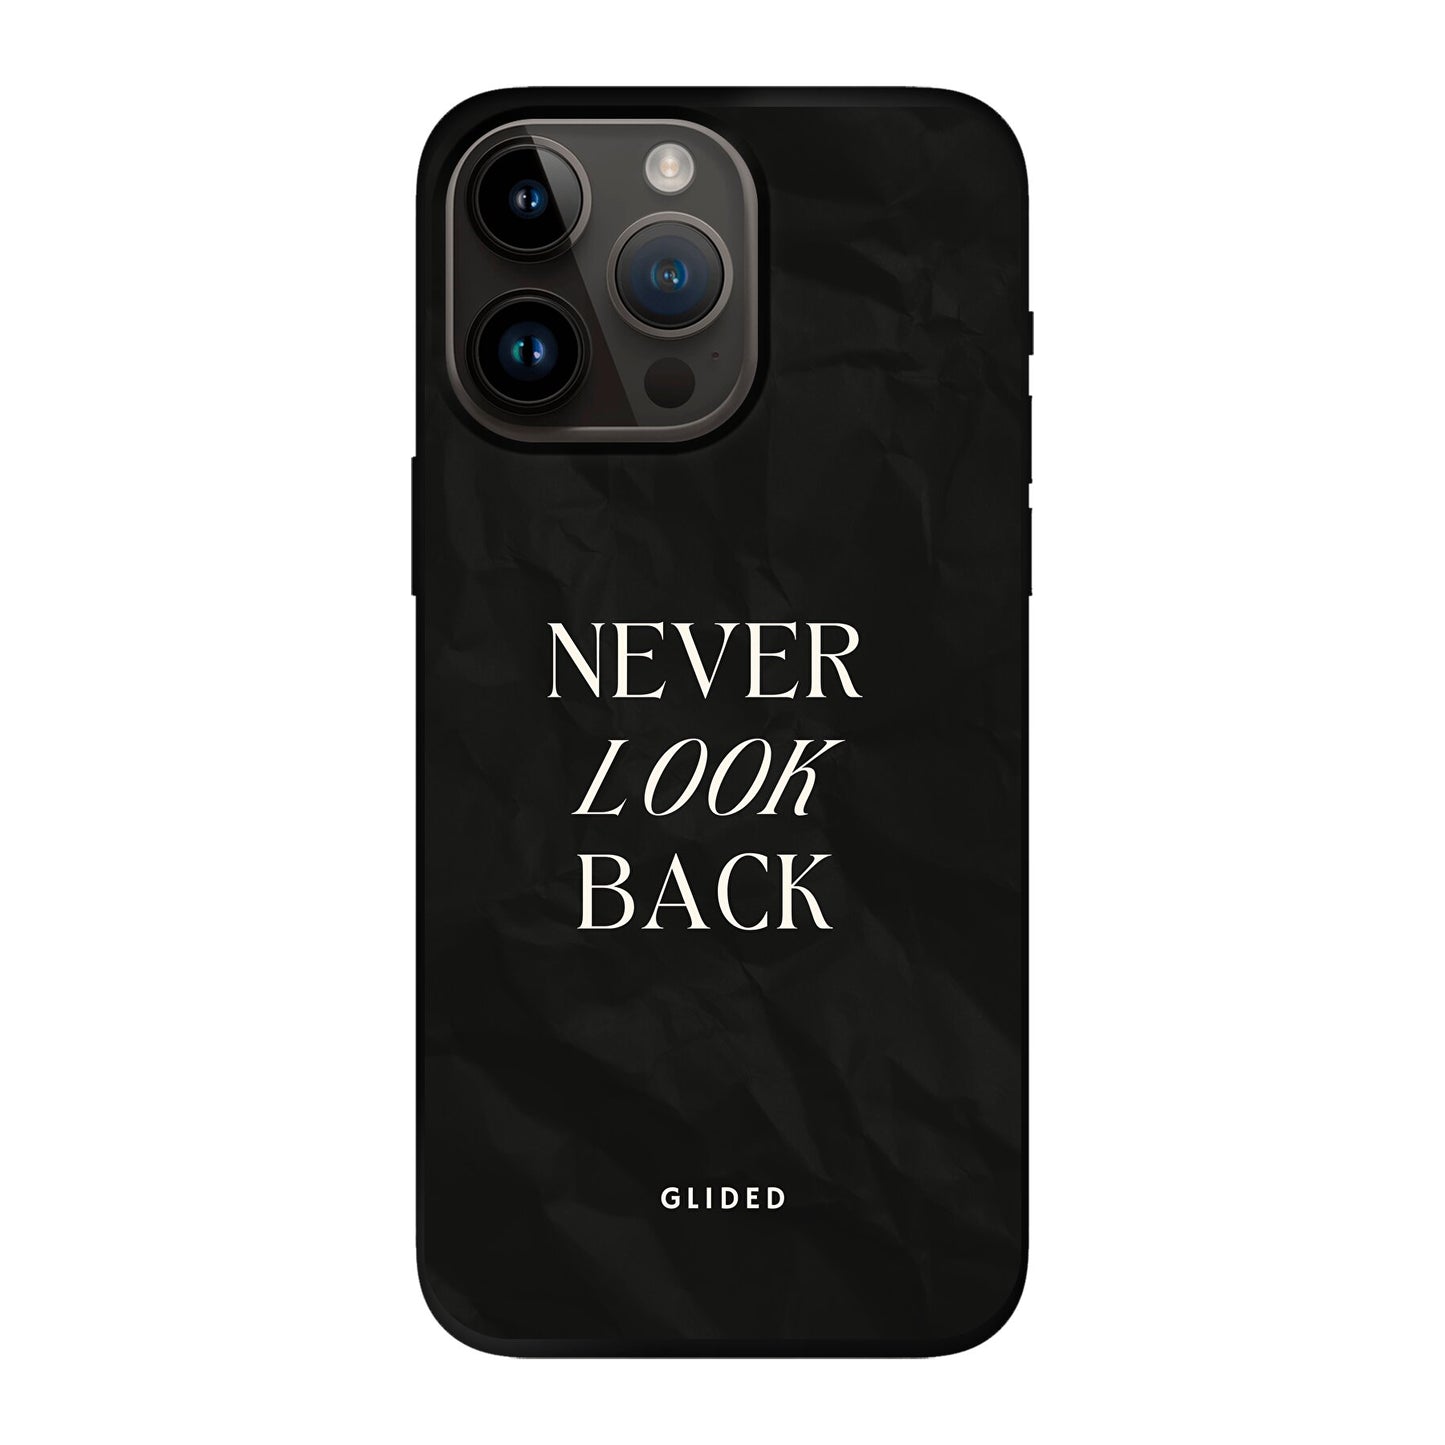 Never Back - iPhone 14 Pro Max Handyhülle Soft case